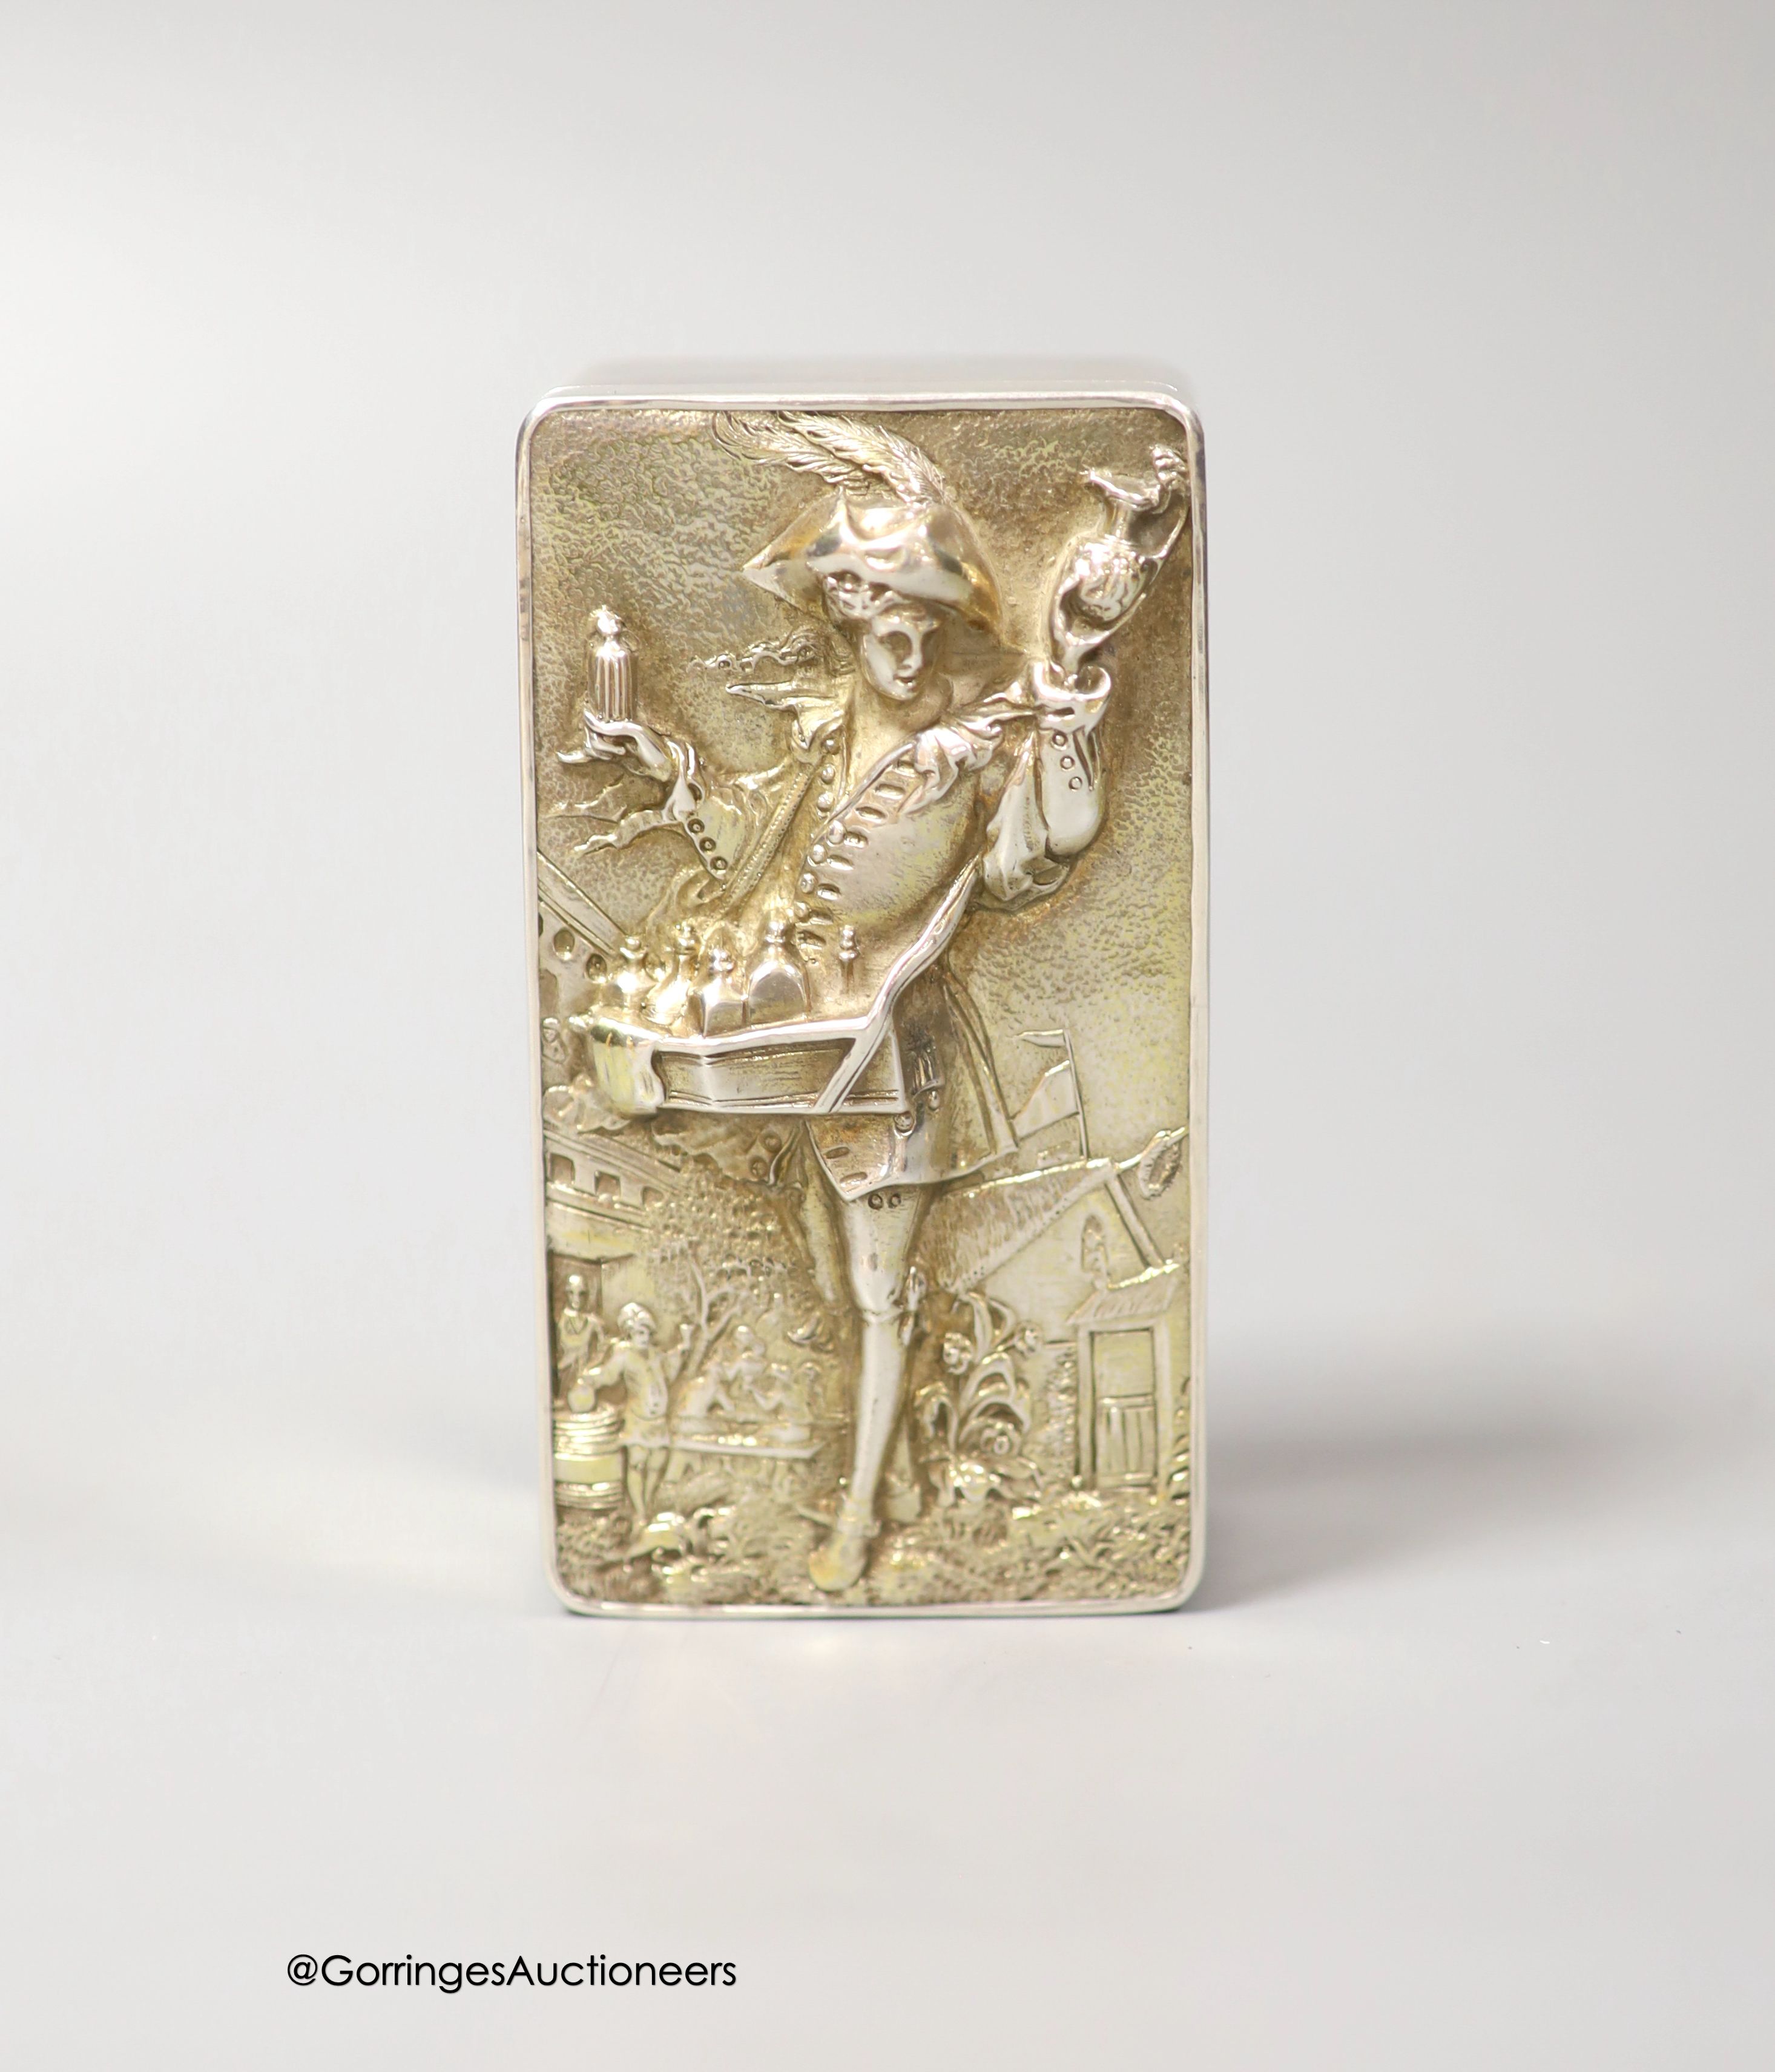 A late 19th/early 20th century continental white metal rectangular box and cover, the lid embossed with the figure of a pedlar, 9.5cm, 155 grams.